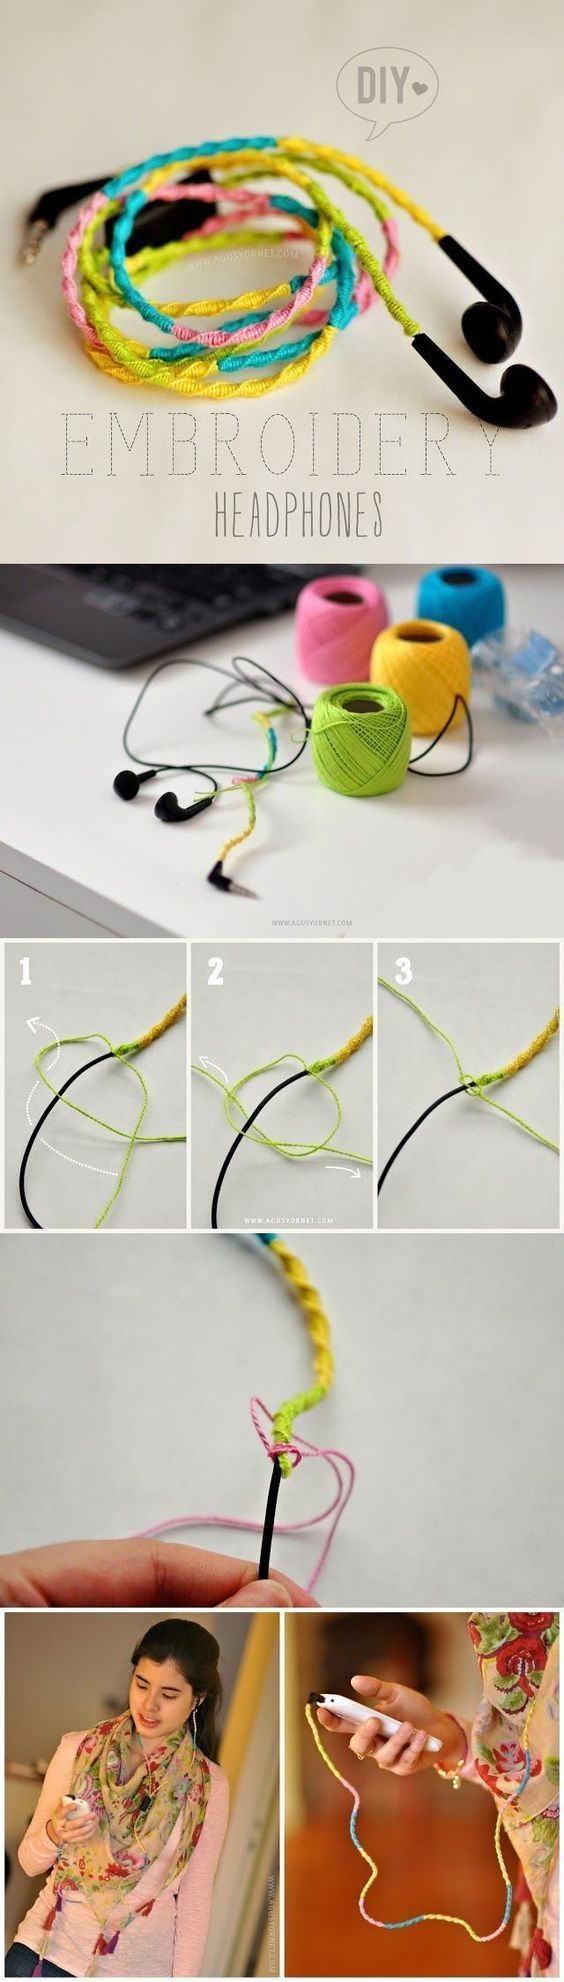 Teen Crafts Ideas and DIY Projects for Teens and Tweens – DIY Embroidery Headphones fun project for teens Hey, girls! There are